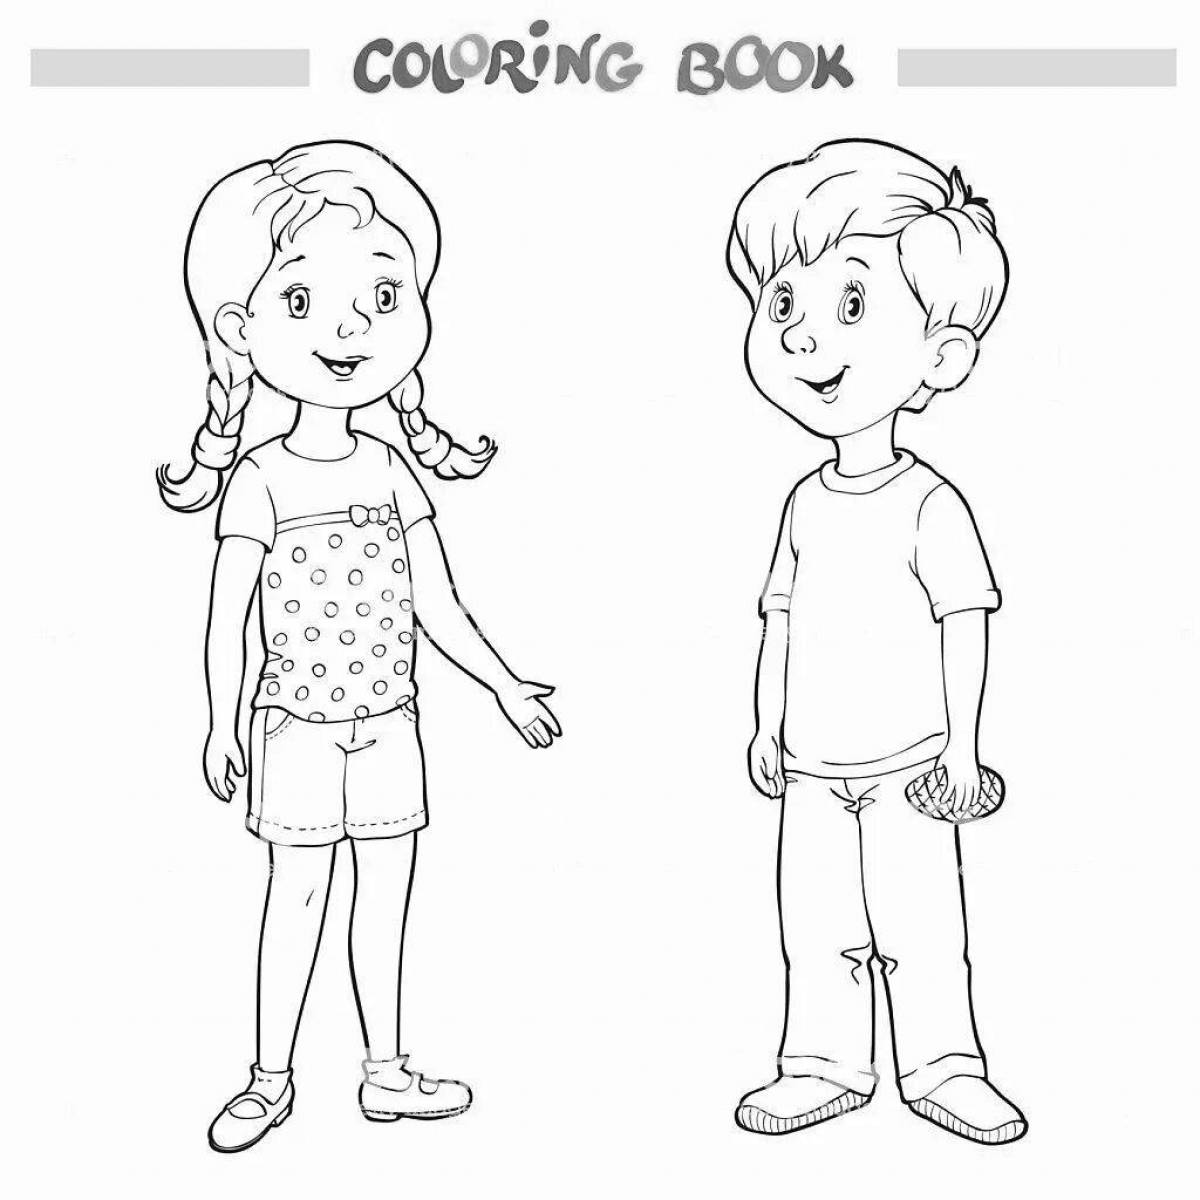 Cute coloring pages for boys and girls